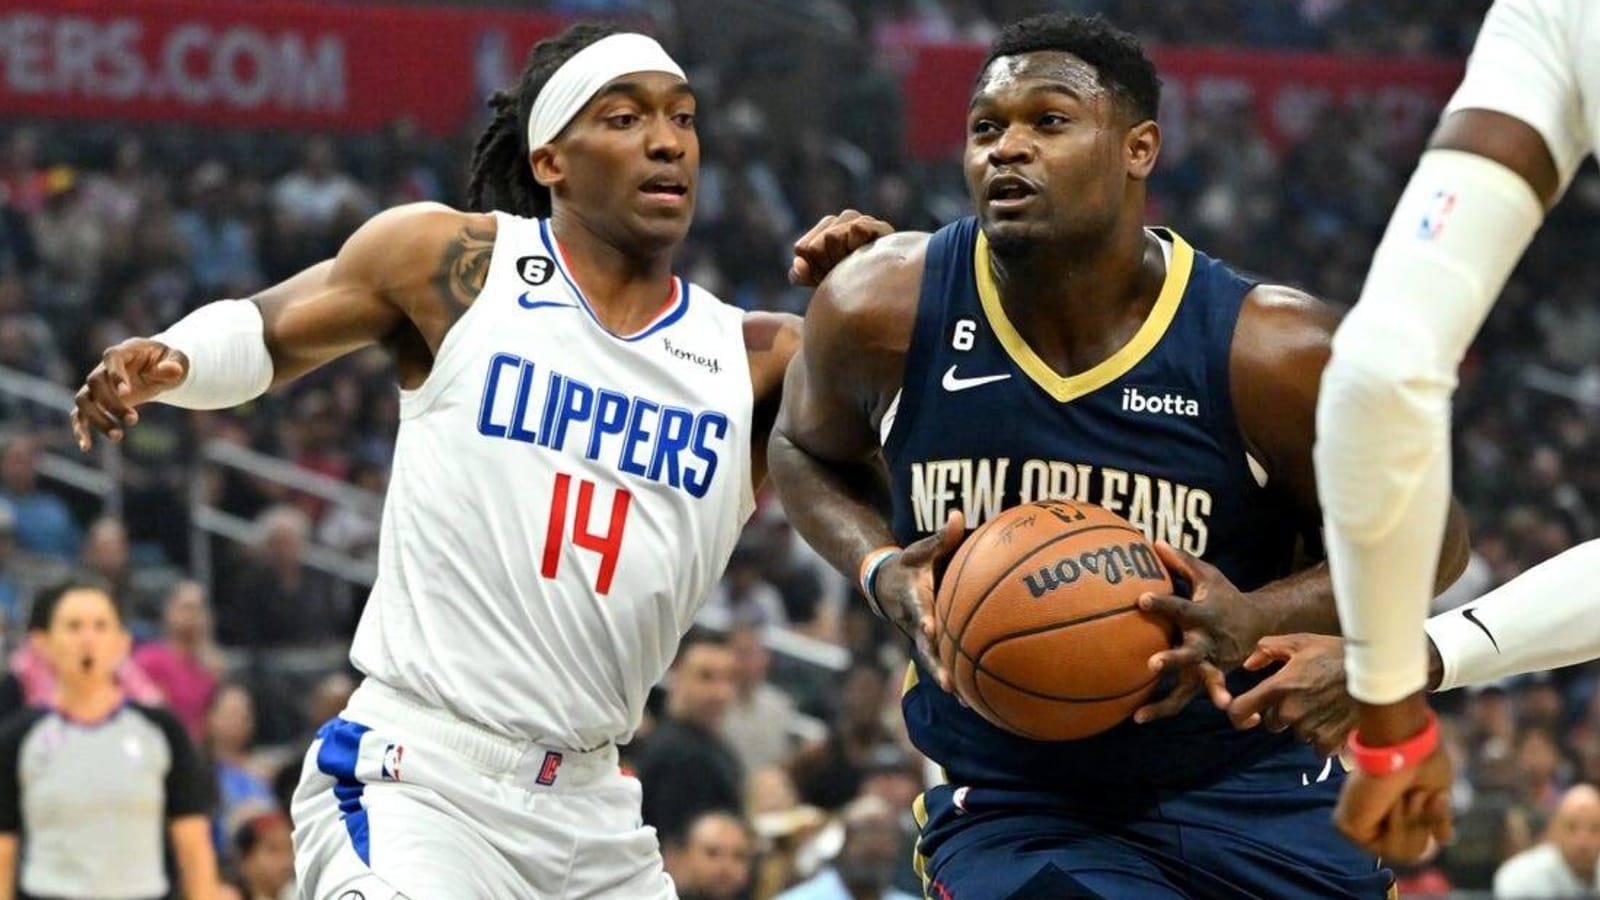 Balanced attack helps Pelicans rally past Clippers